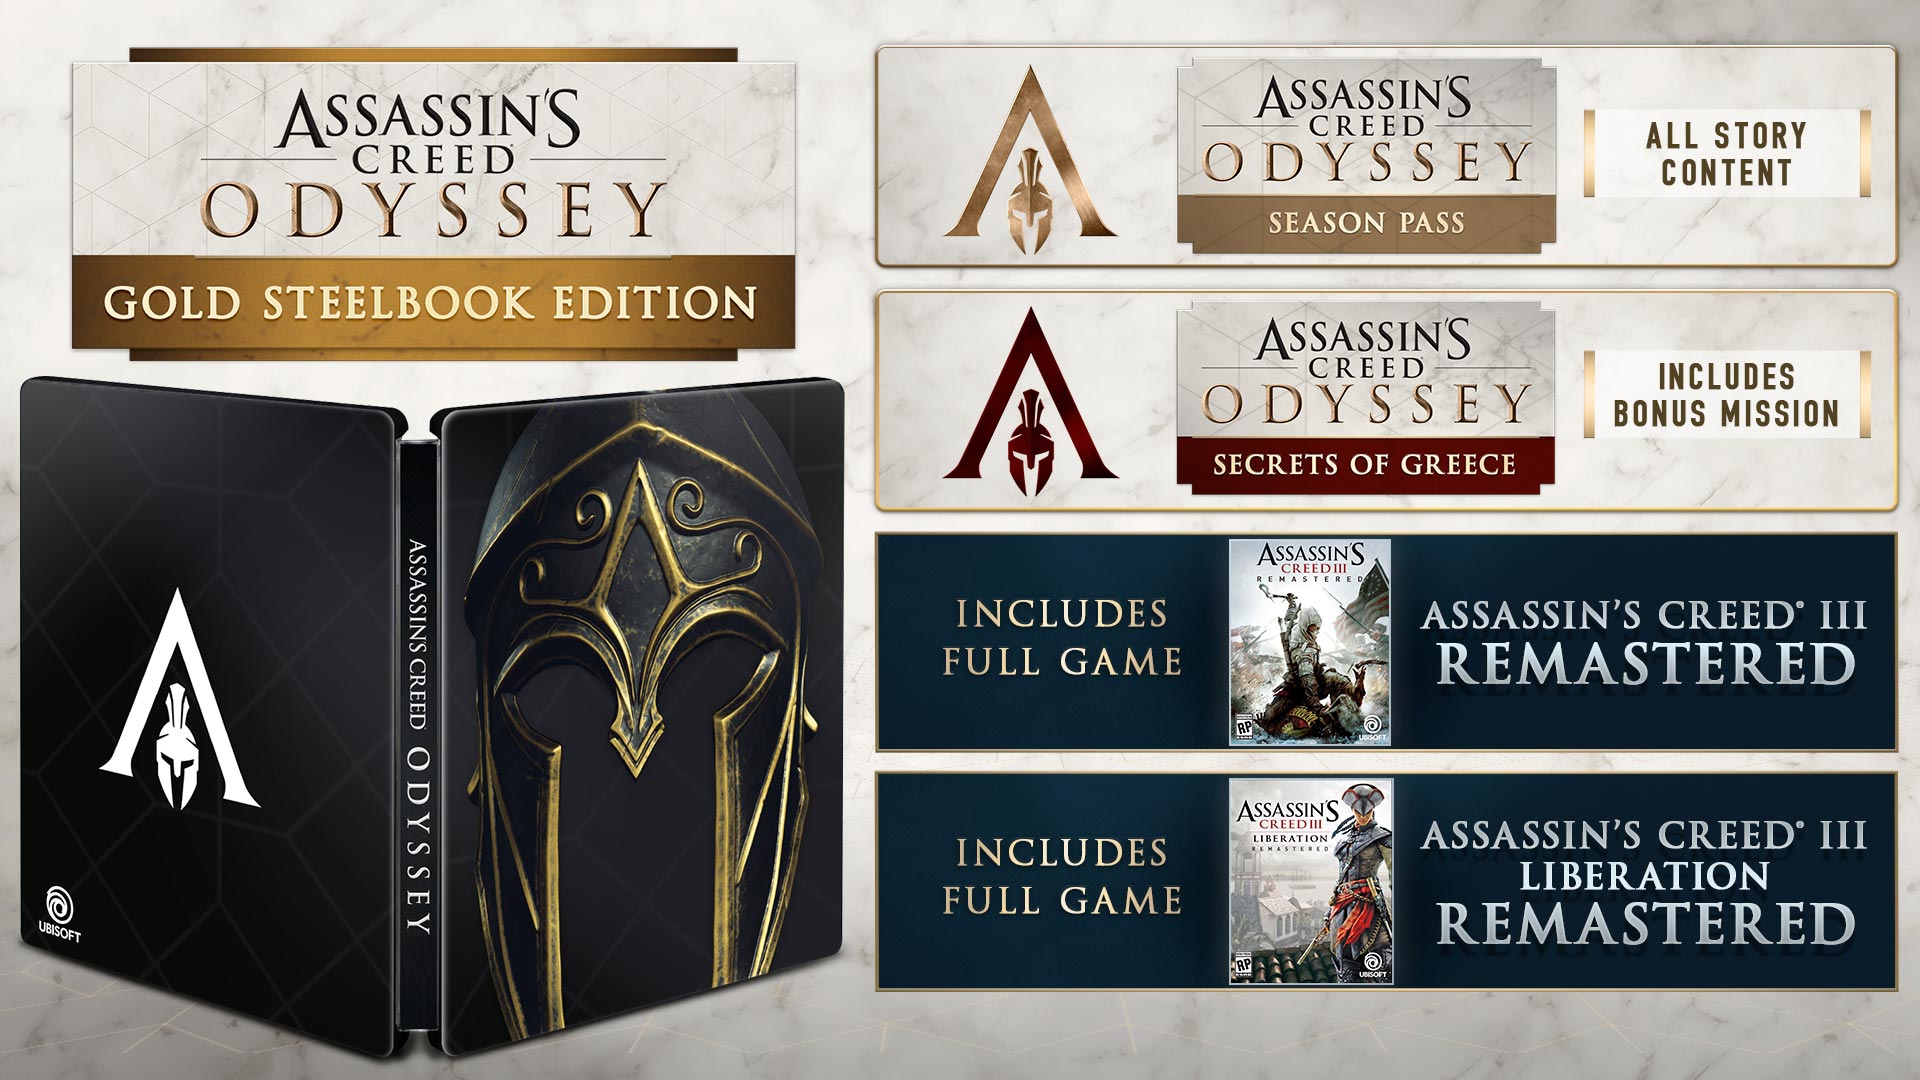 Buy Assassin's Creed® Odyssey Gold Steelbook Edition for PS4 and Xbox One |  Ubisoft Official Store